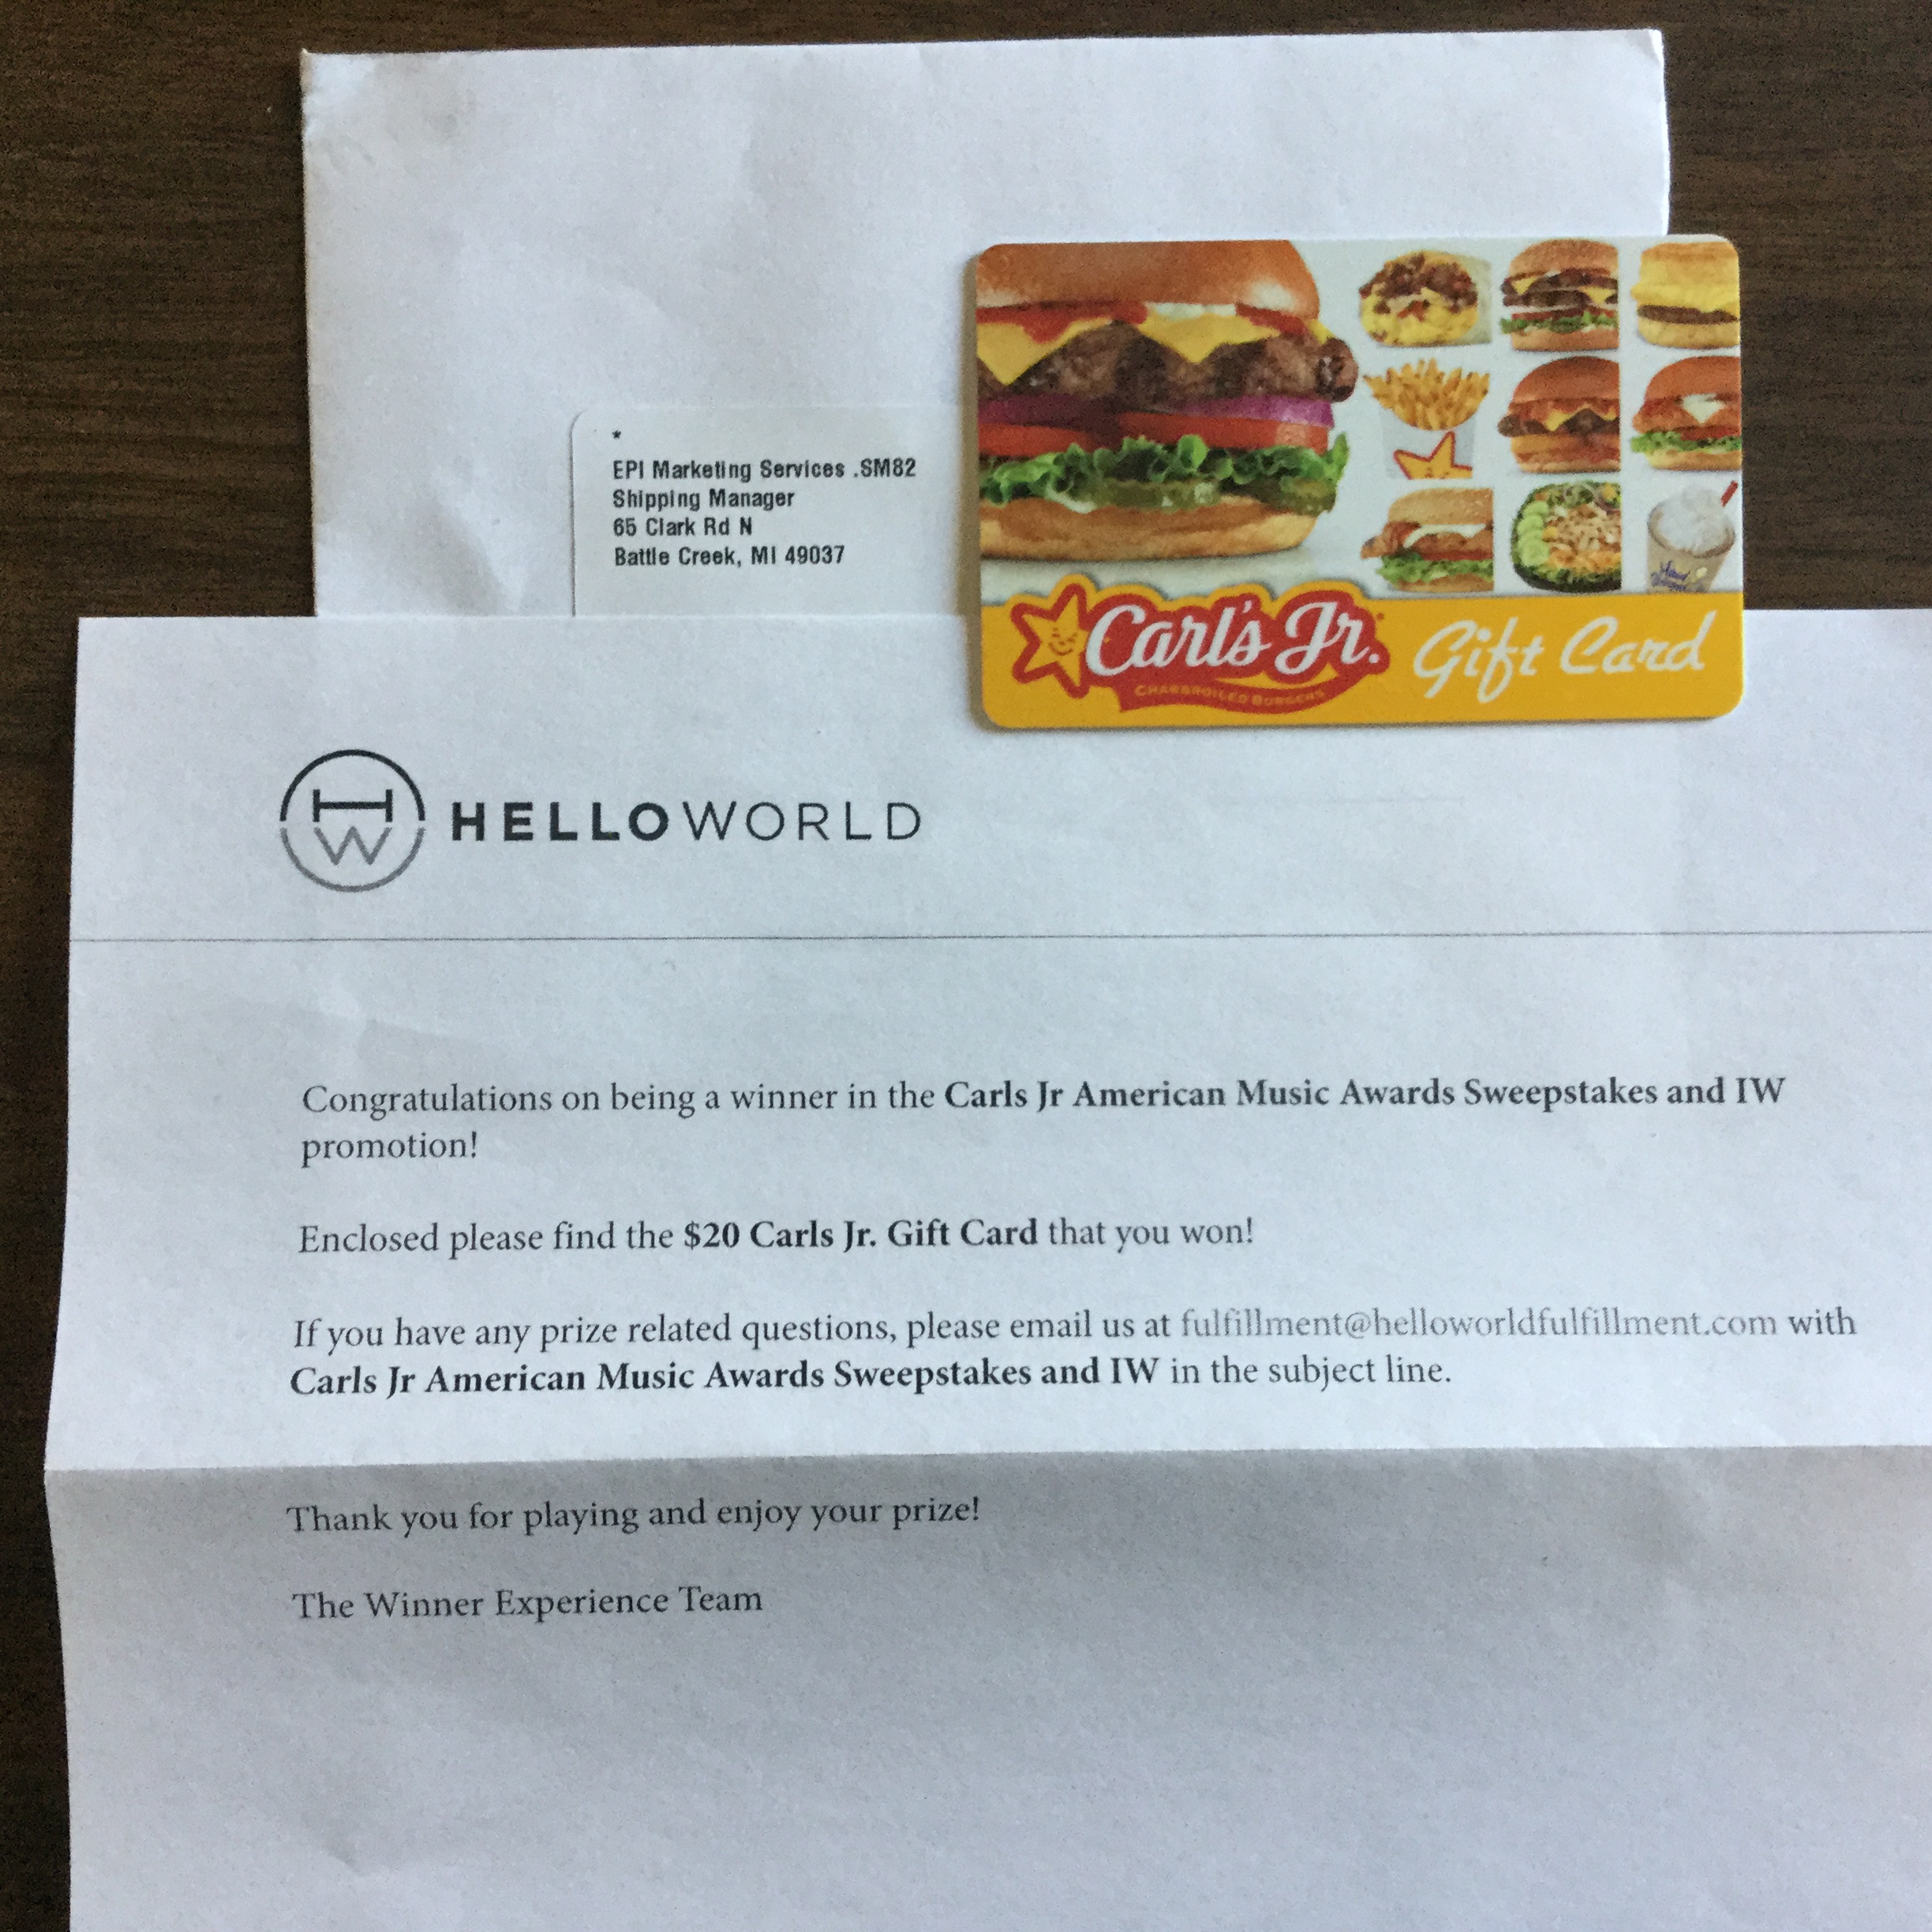 $20 Carl’s Jr. Gift Card Contest Win